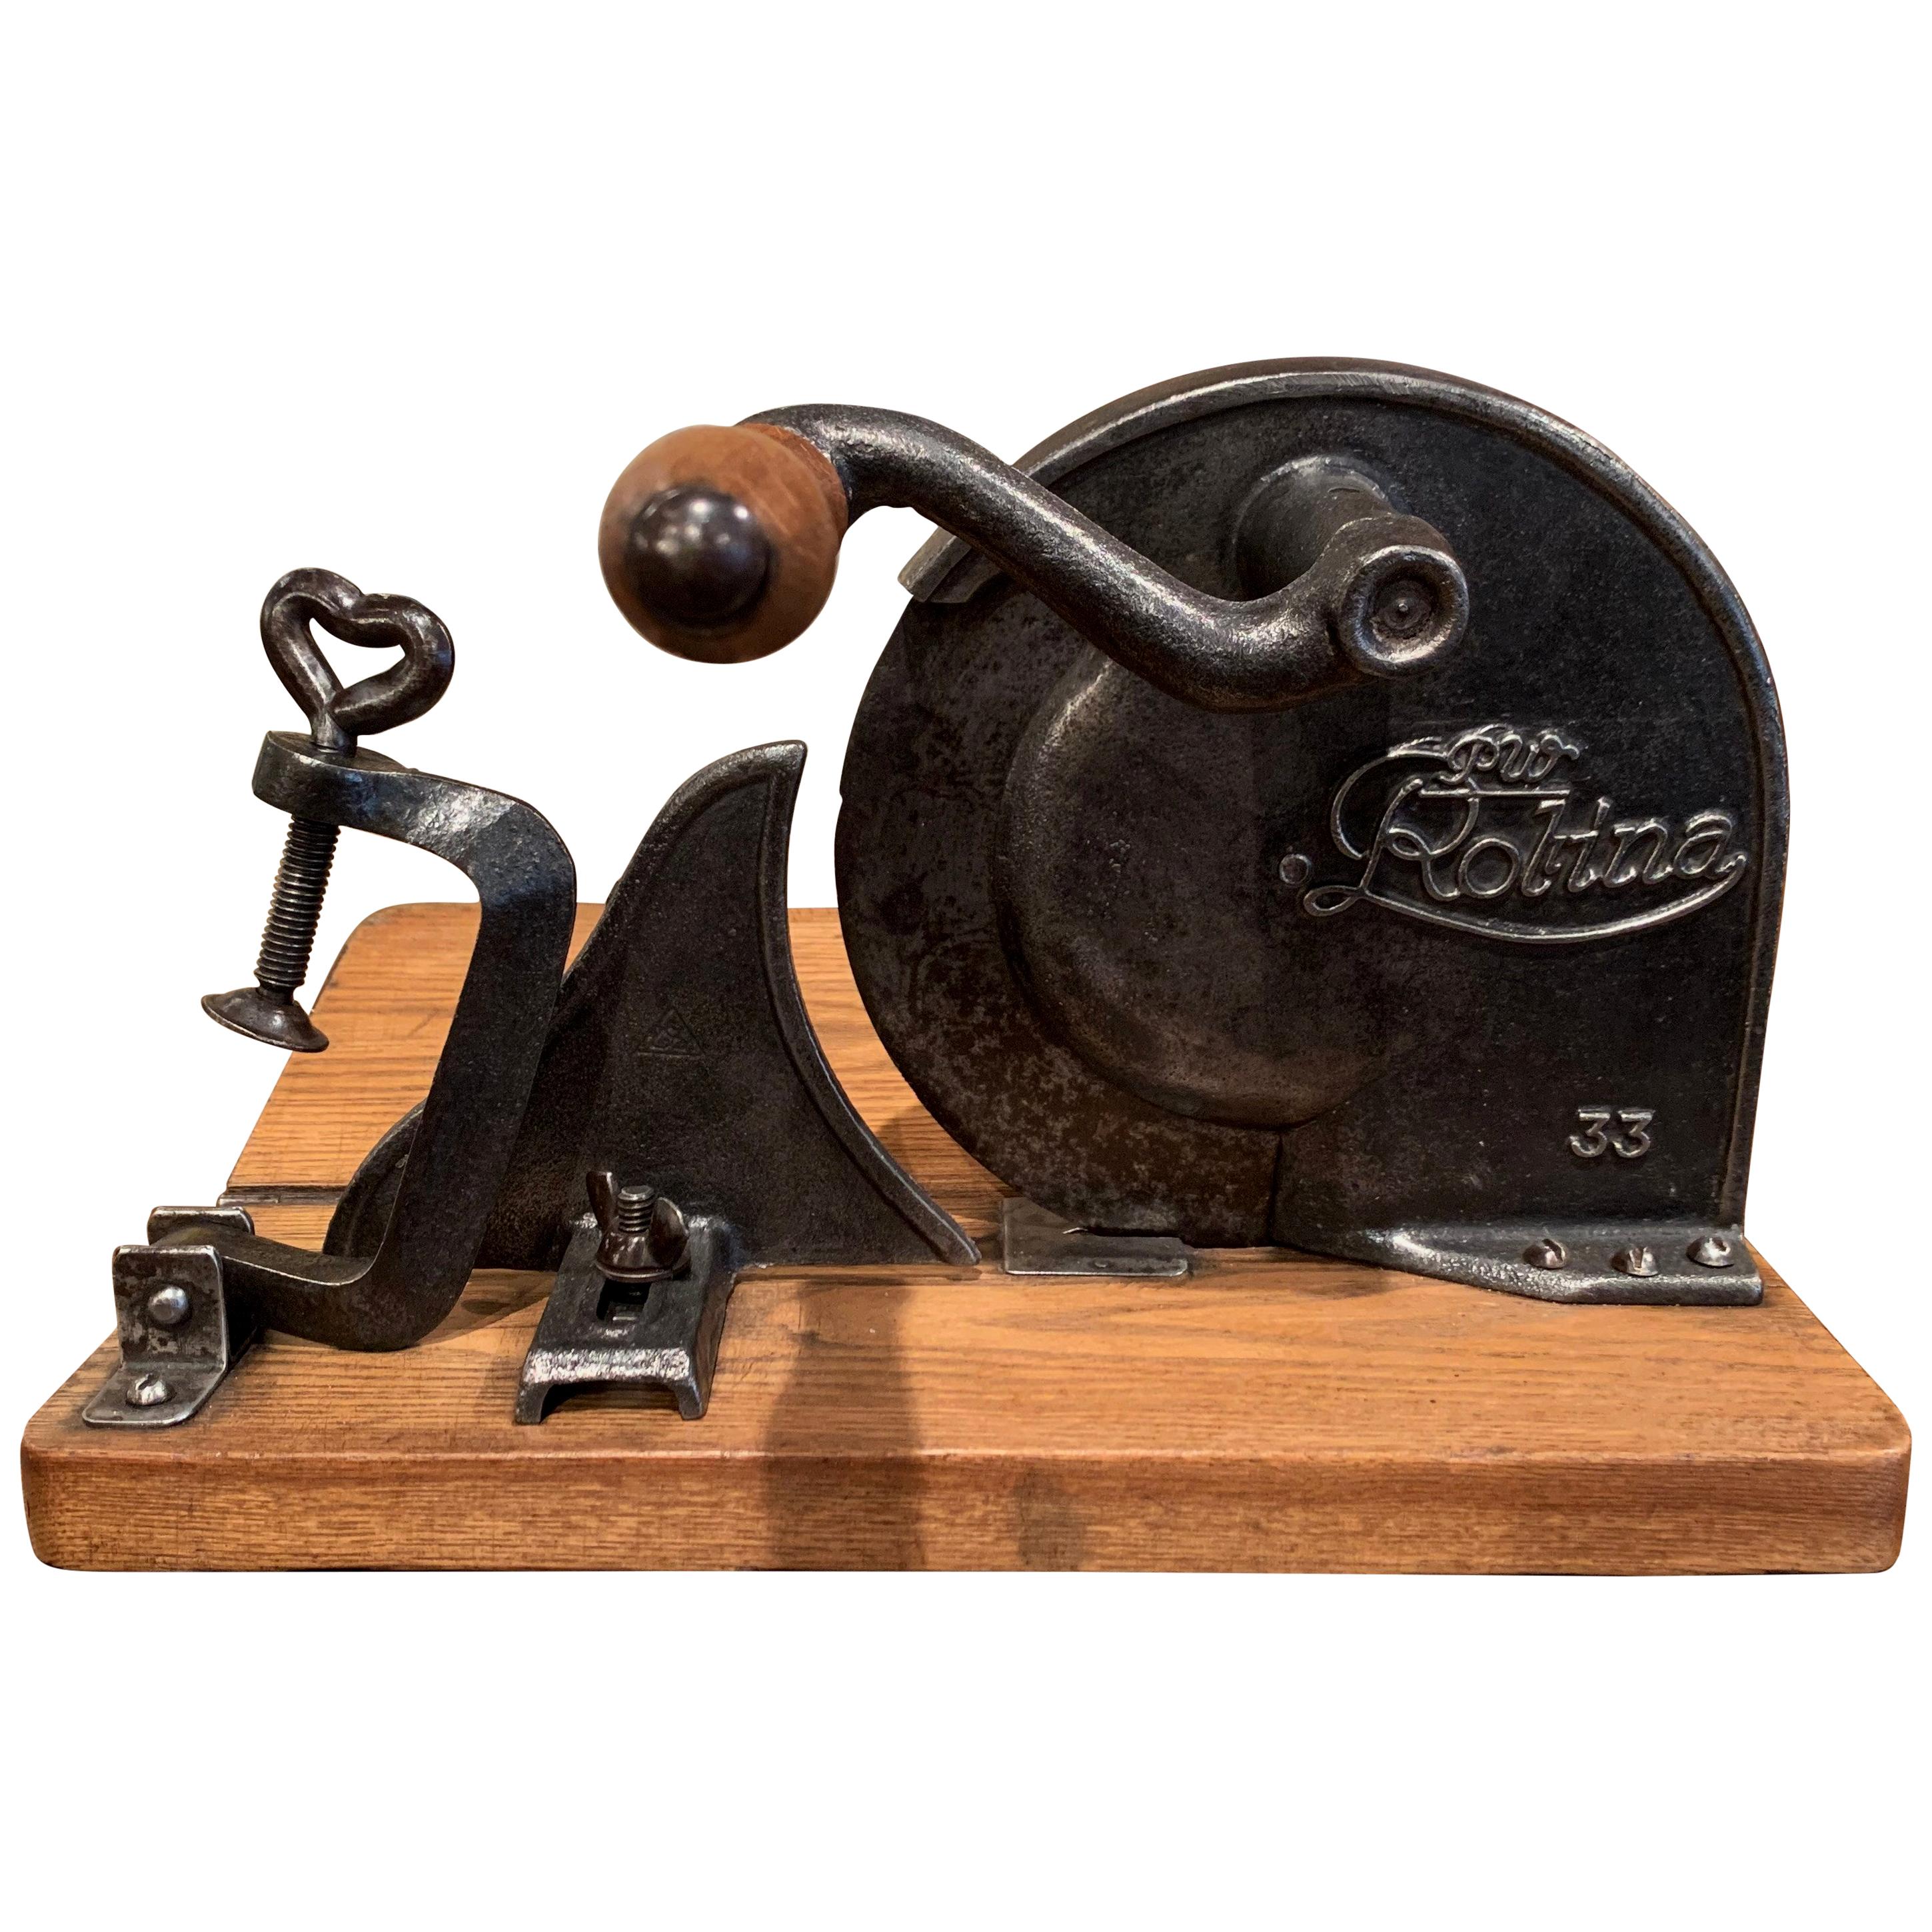 Early 20th Century German Iron and Wood Adjustable Meat and Bread Slicer